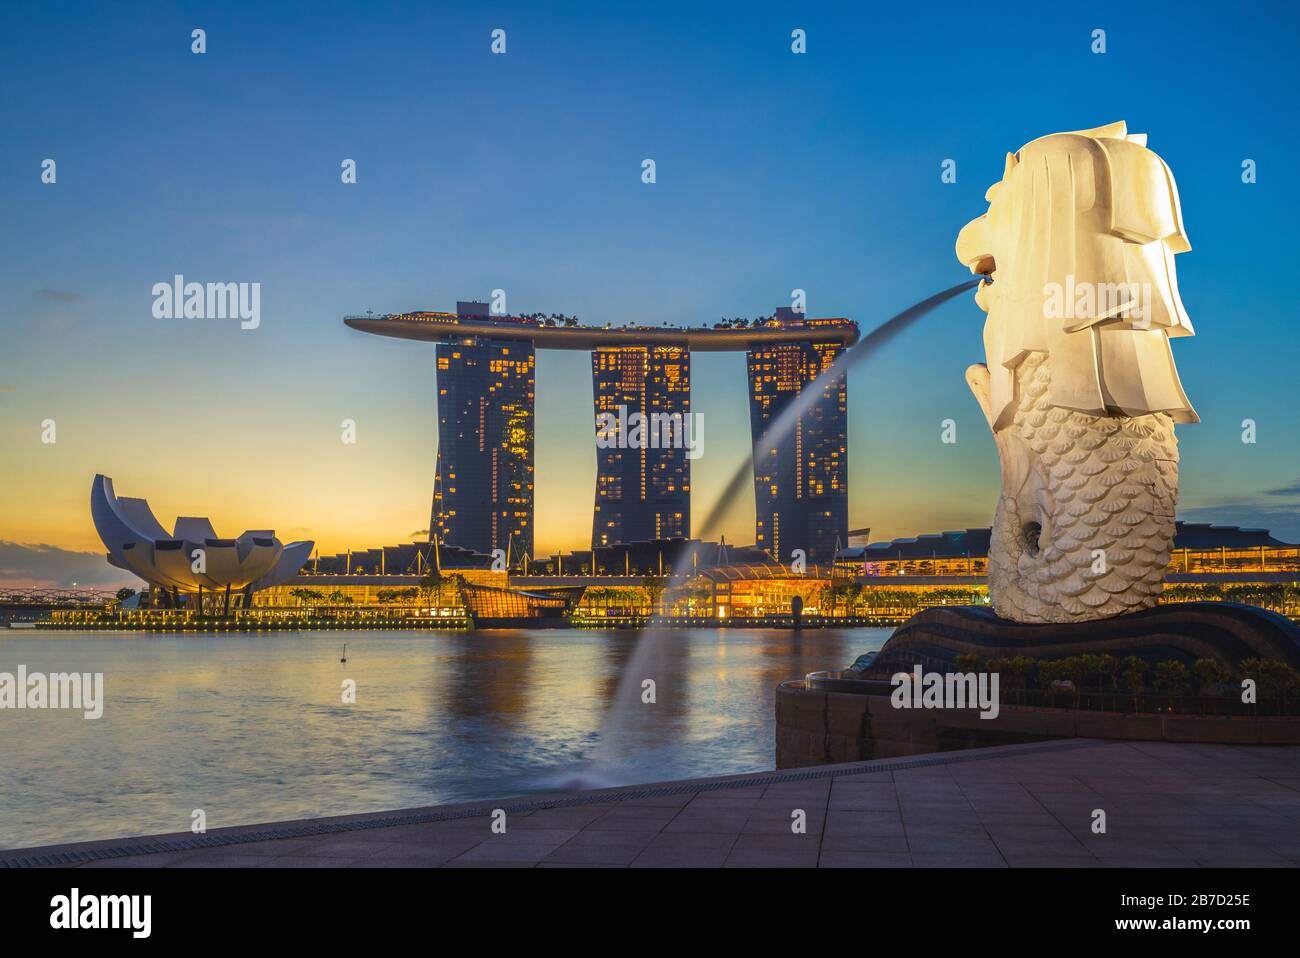 singapore, singapore - February 6, 2020: skyline of singapore with merlion and sands at night Stock Photo